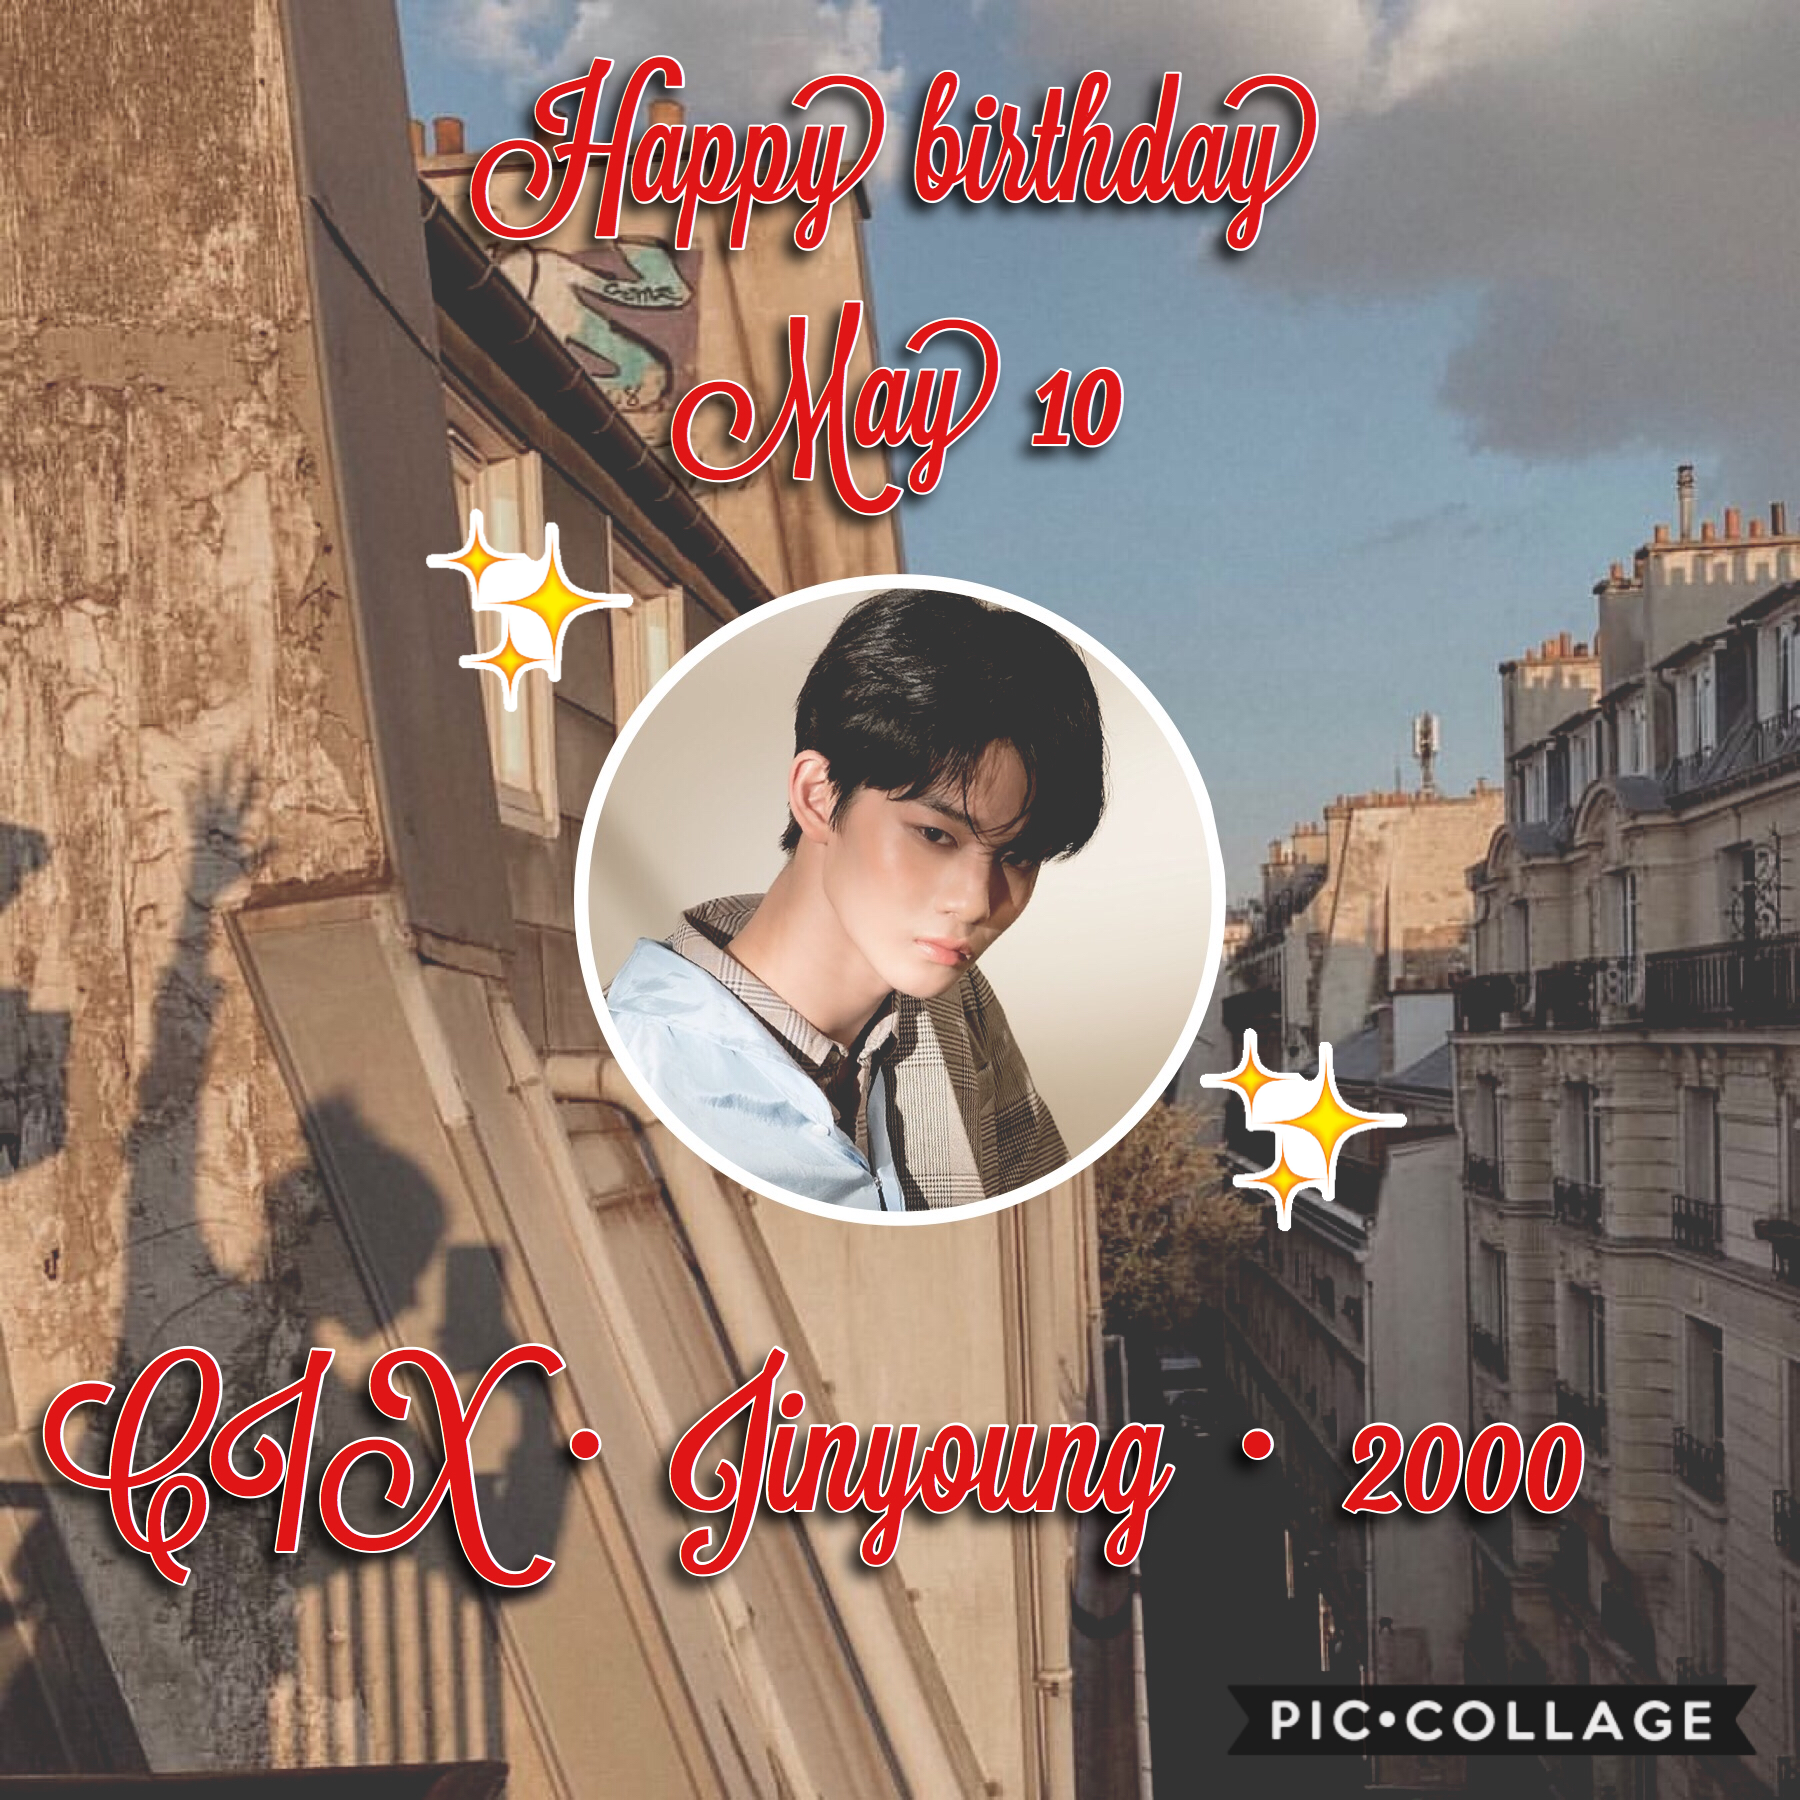 •🌷🌹•
Happy birthday Jinyoung! He’s grown so so much over the years and I can’t believe that he’s already 20! I can’t wait to see what amazing things he has in store for us in the coming years🥺💞
🌹🌷~Whoop~🌷🌹